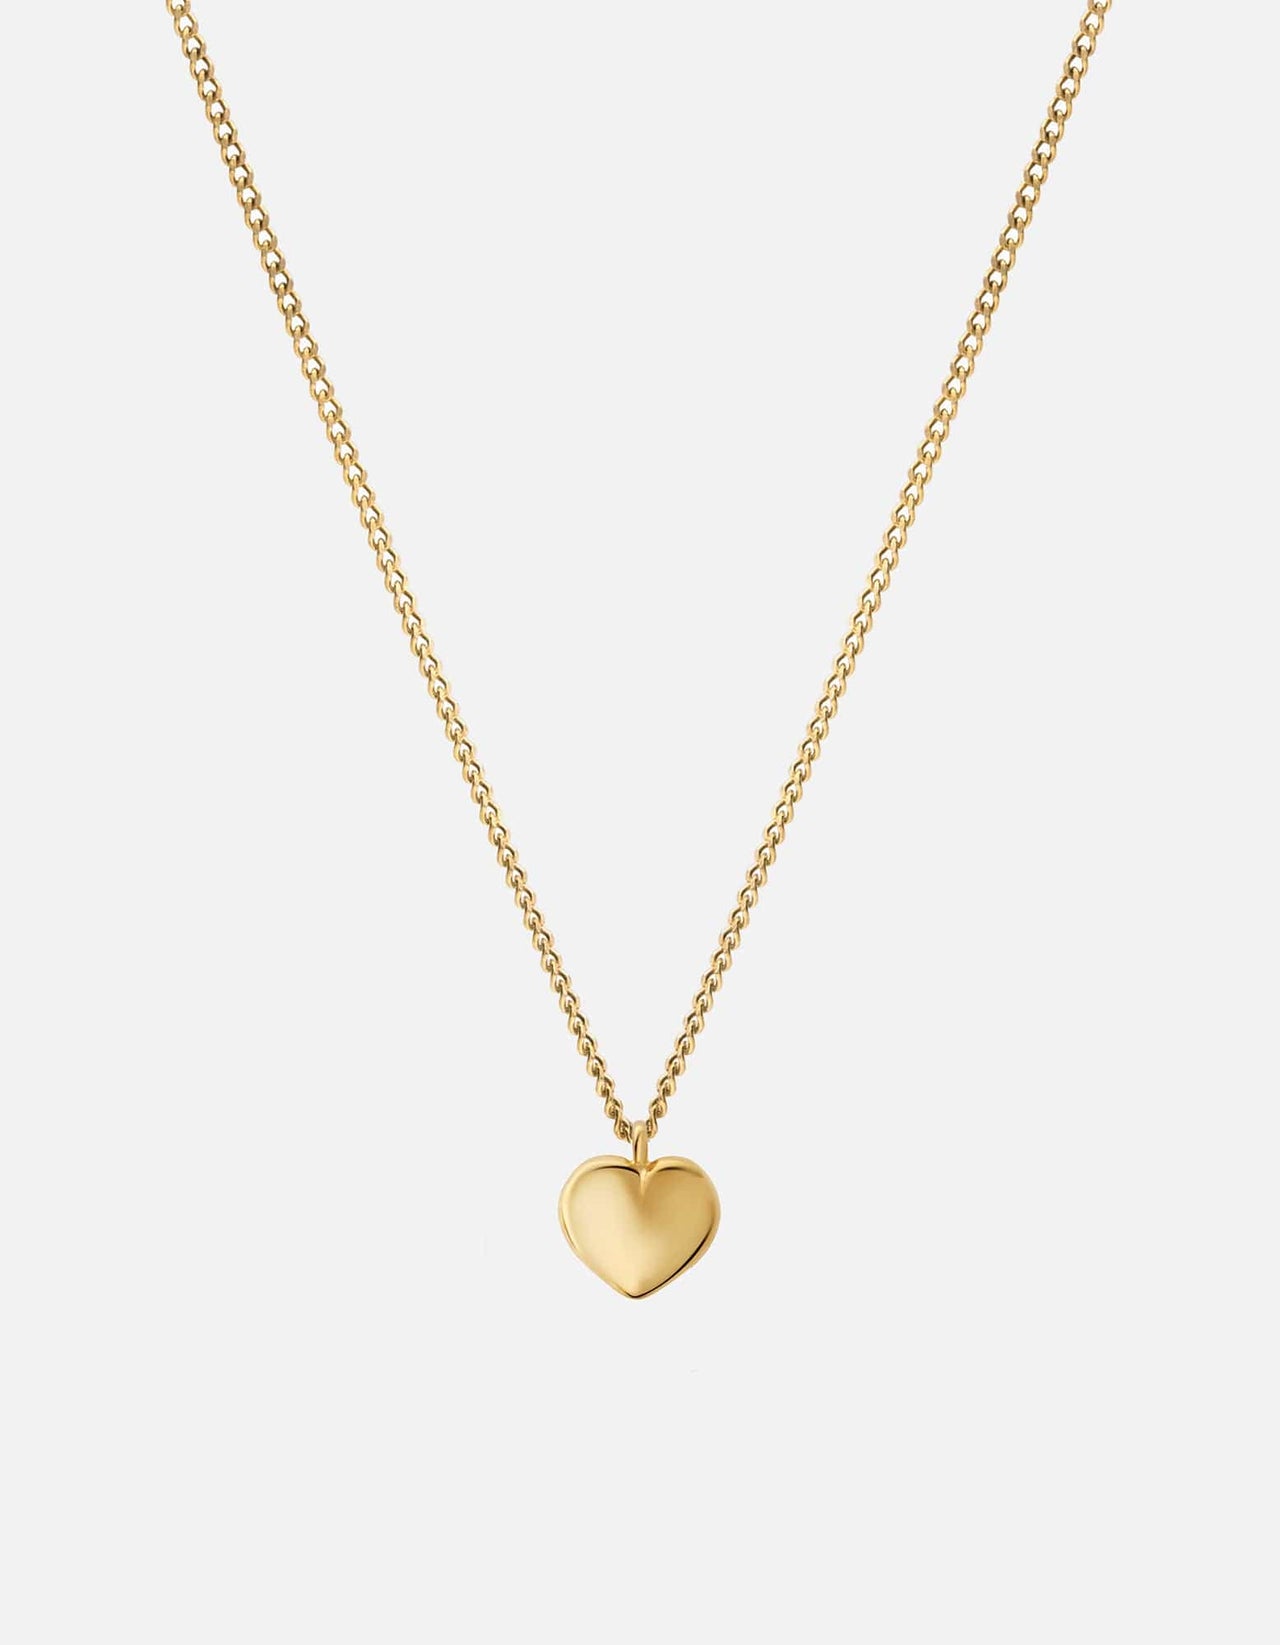 Gold Paperclip Necklace - Gold Paperclip Heart Necklace | Ana Luisa |  Online Jewelry Store At Prices You'll Love